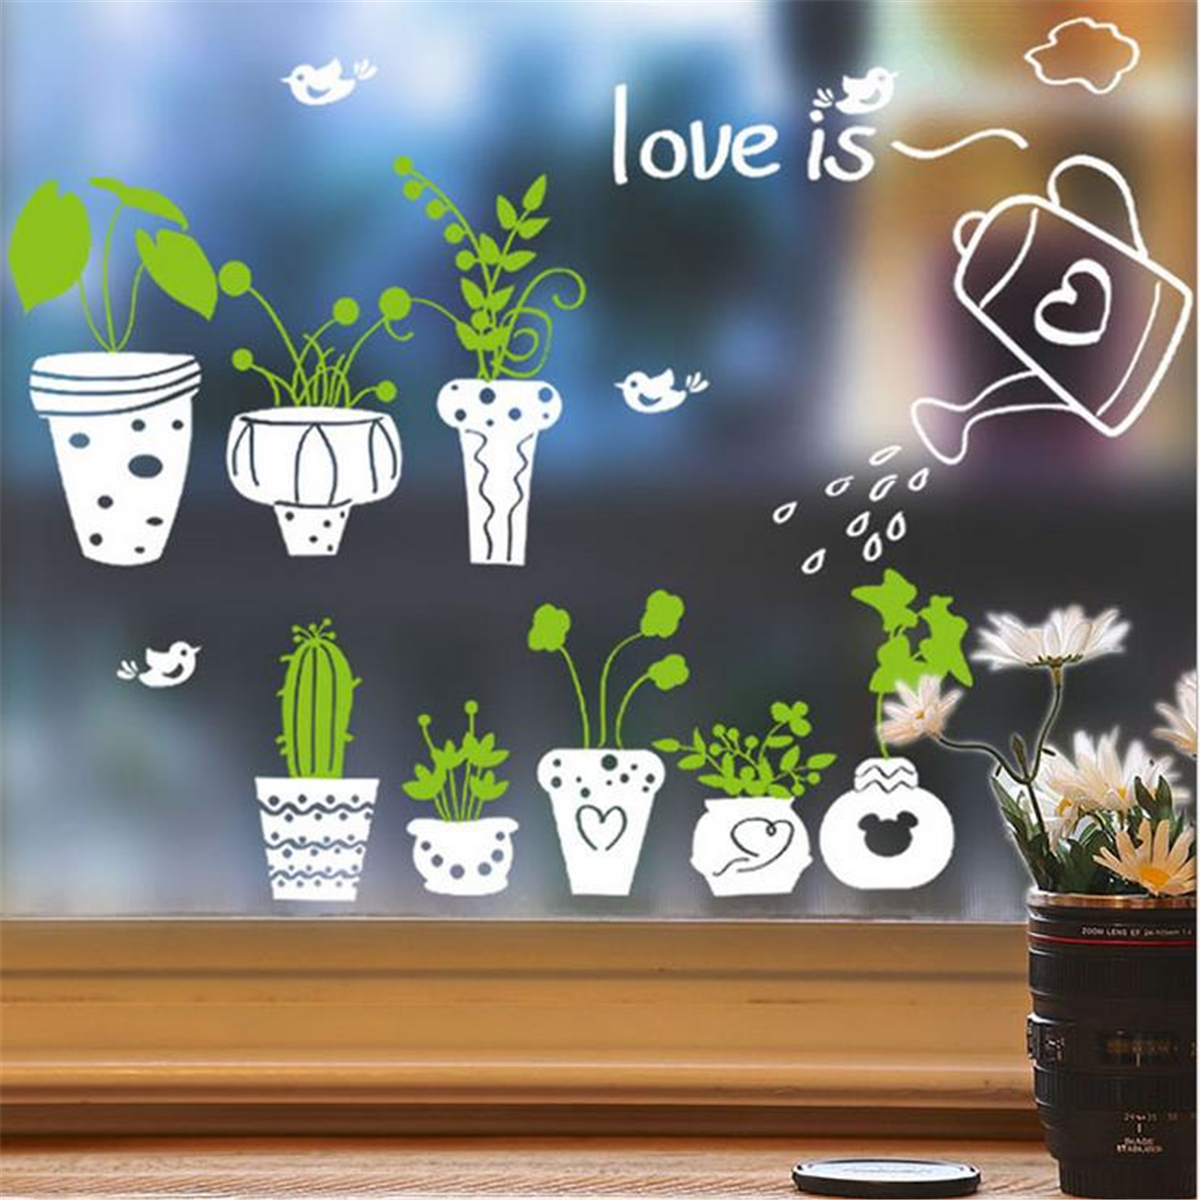 Wall Sticker Live Love Lake Wall Decal Vinyl Sticker Tattoo For Windows Glass Wall with Size and Color Options